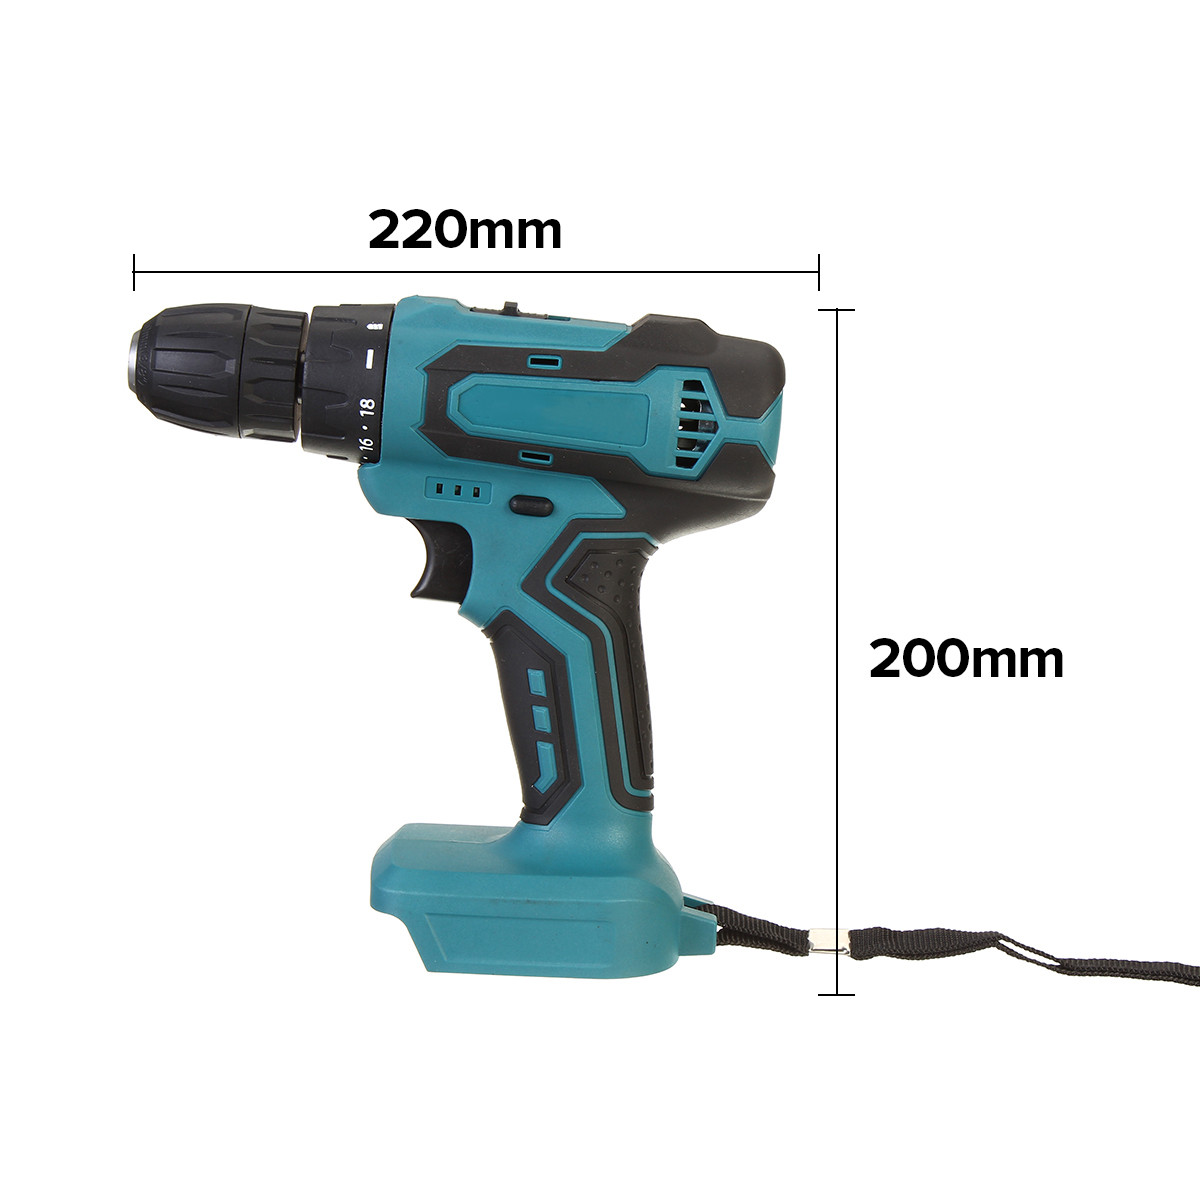 18V-13mm-Cordless-Electric-Drill-2-Speed-Screwdriver-For-Makita-Battery-1717184-9